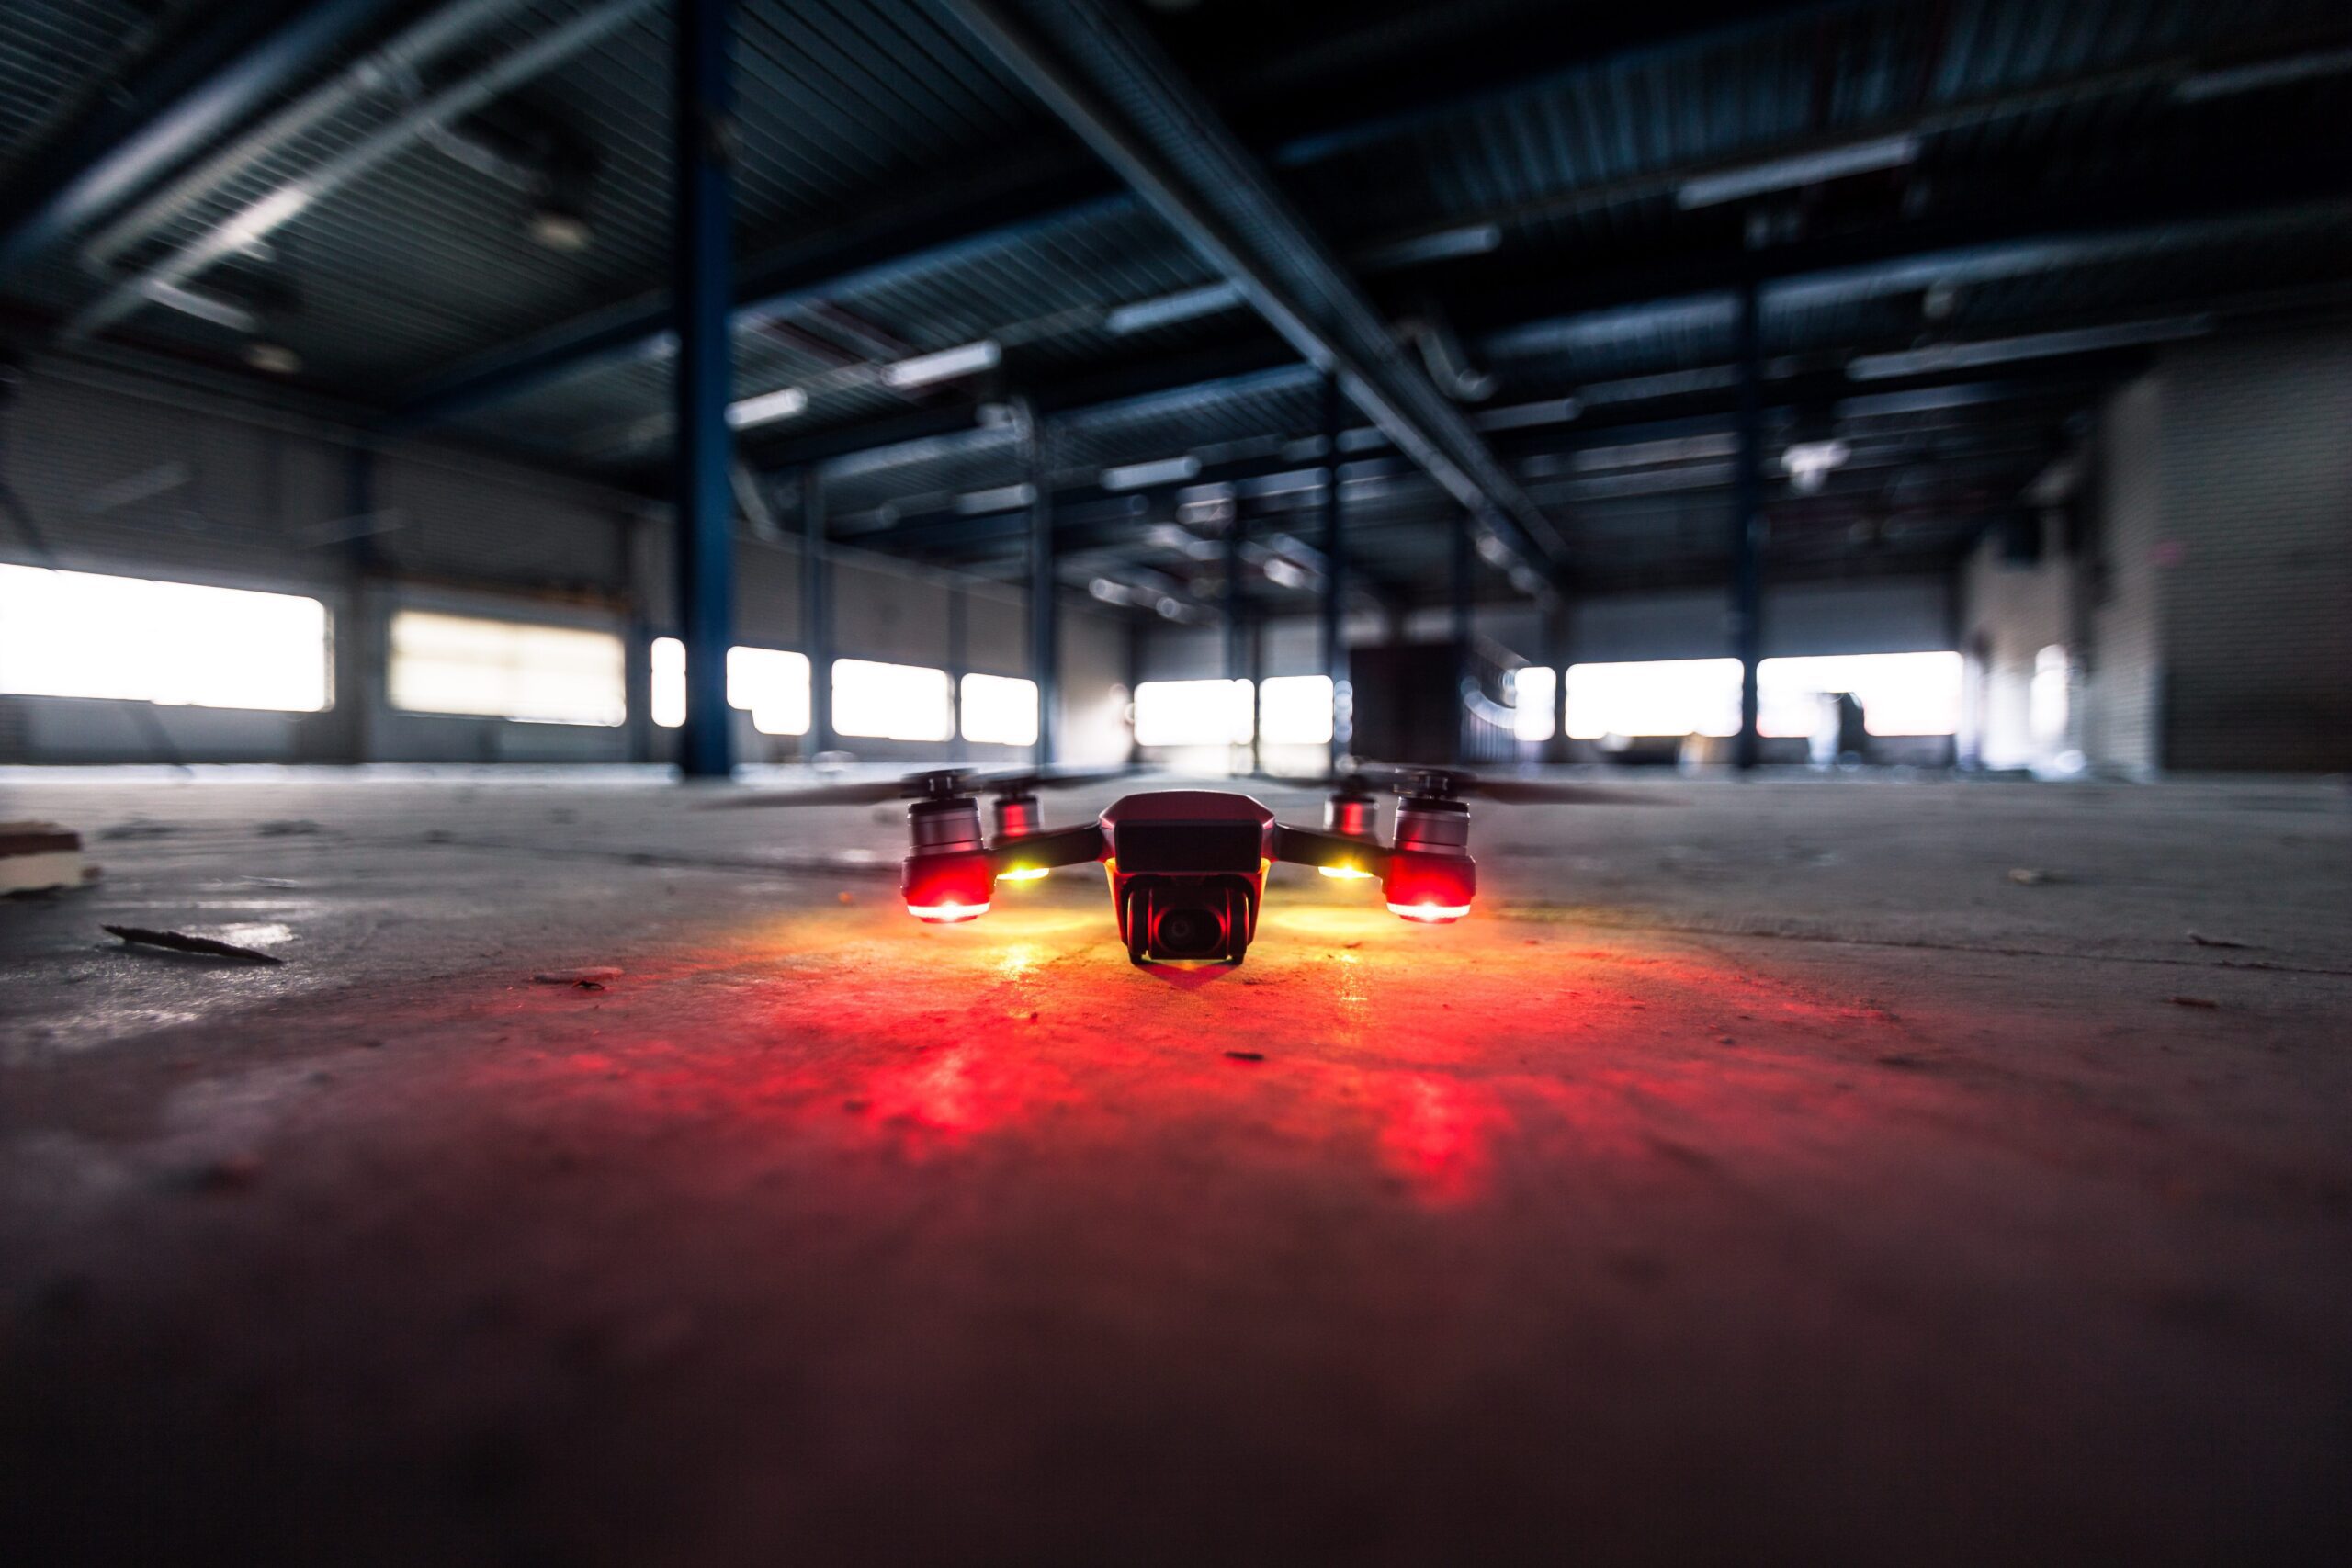 A close-up of a UWB-Based RTLS drone on a concrete floor, in the dark but the drone has red lights that reflects on the floor. The environment looks like an abandoned empty warehouse.